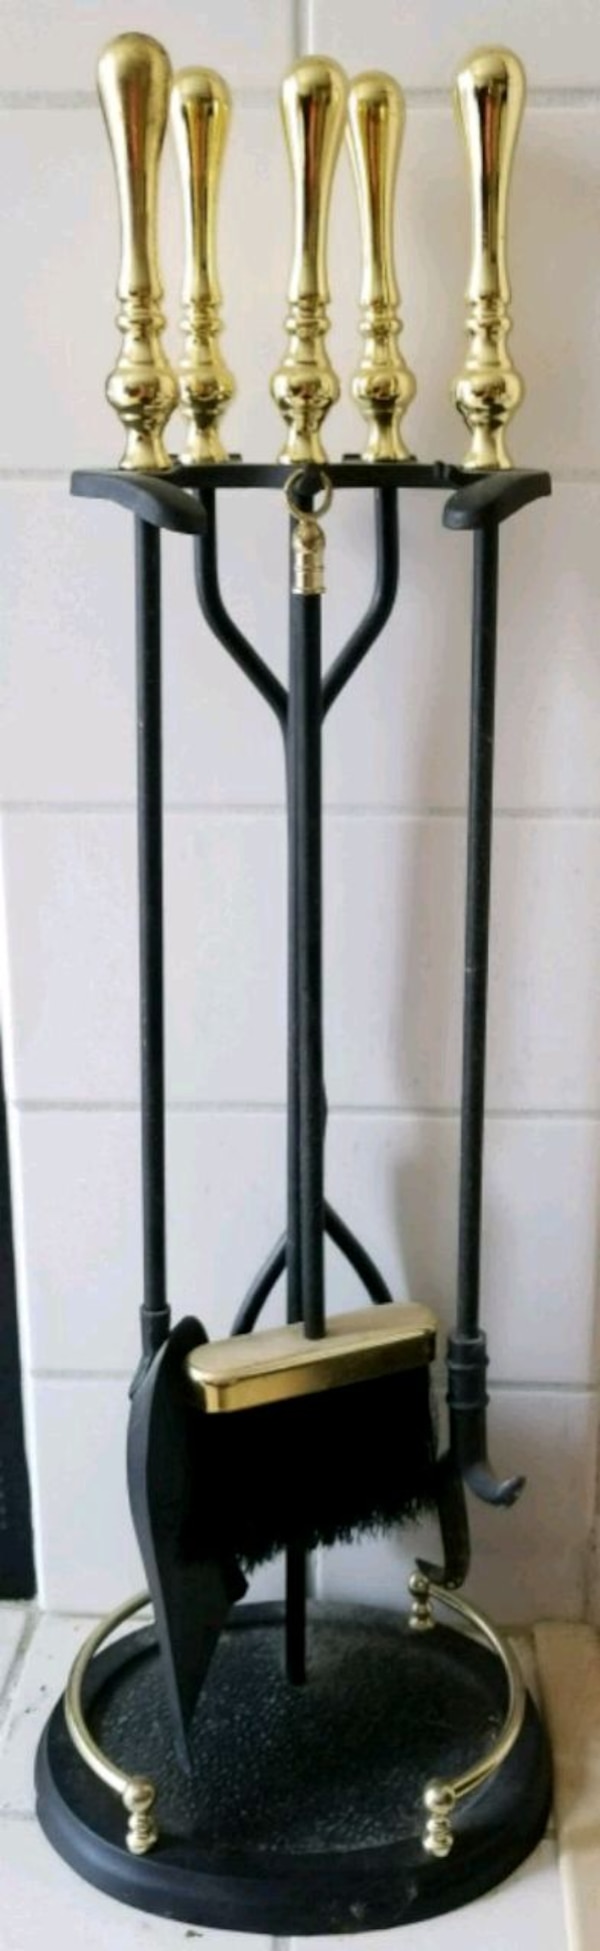 Fireplace tool Holder Best Of Fireplace tools